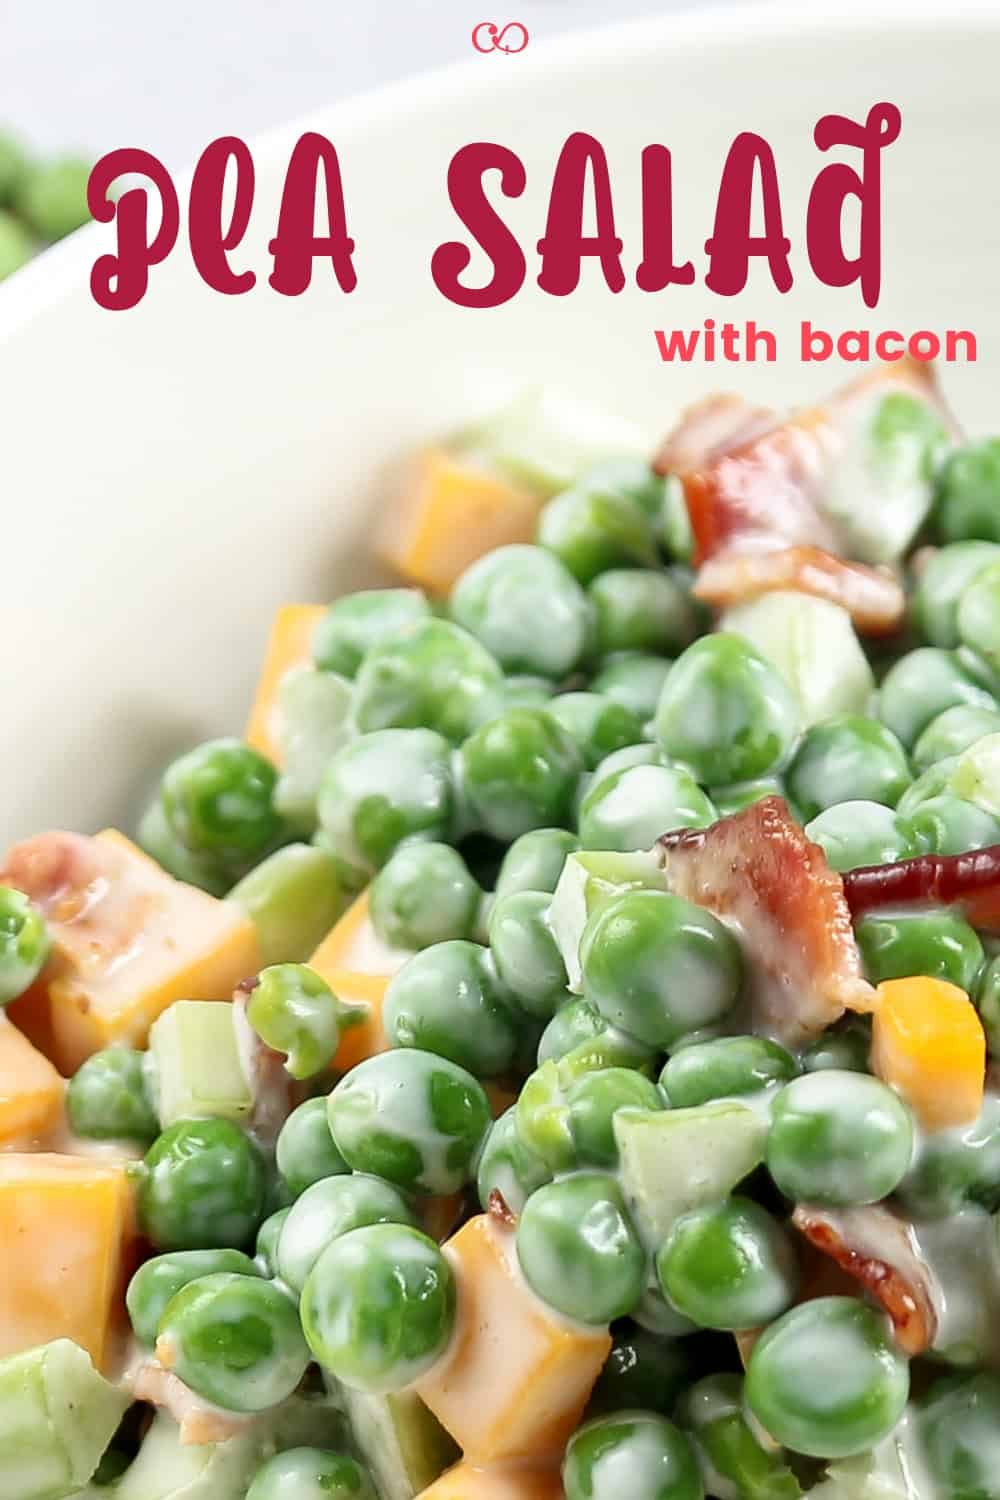 This creamy, cold Pea Salad with bacon is an easy recipe your family is going to love.  ♡ cheerfulcook.com #oldfashioned #withbacon #classicsalad #salad via @cheerfulcook